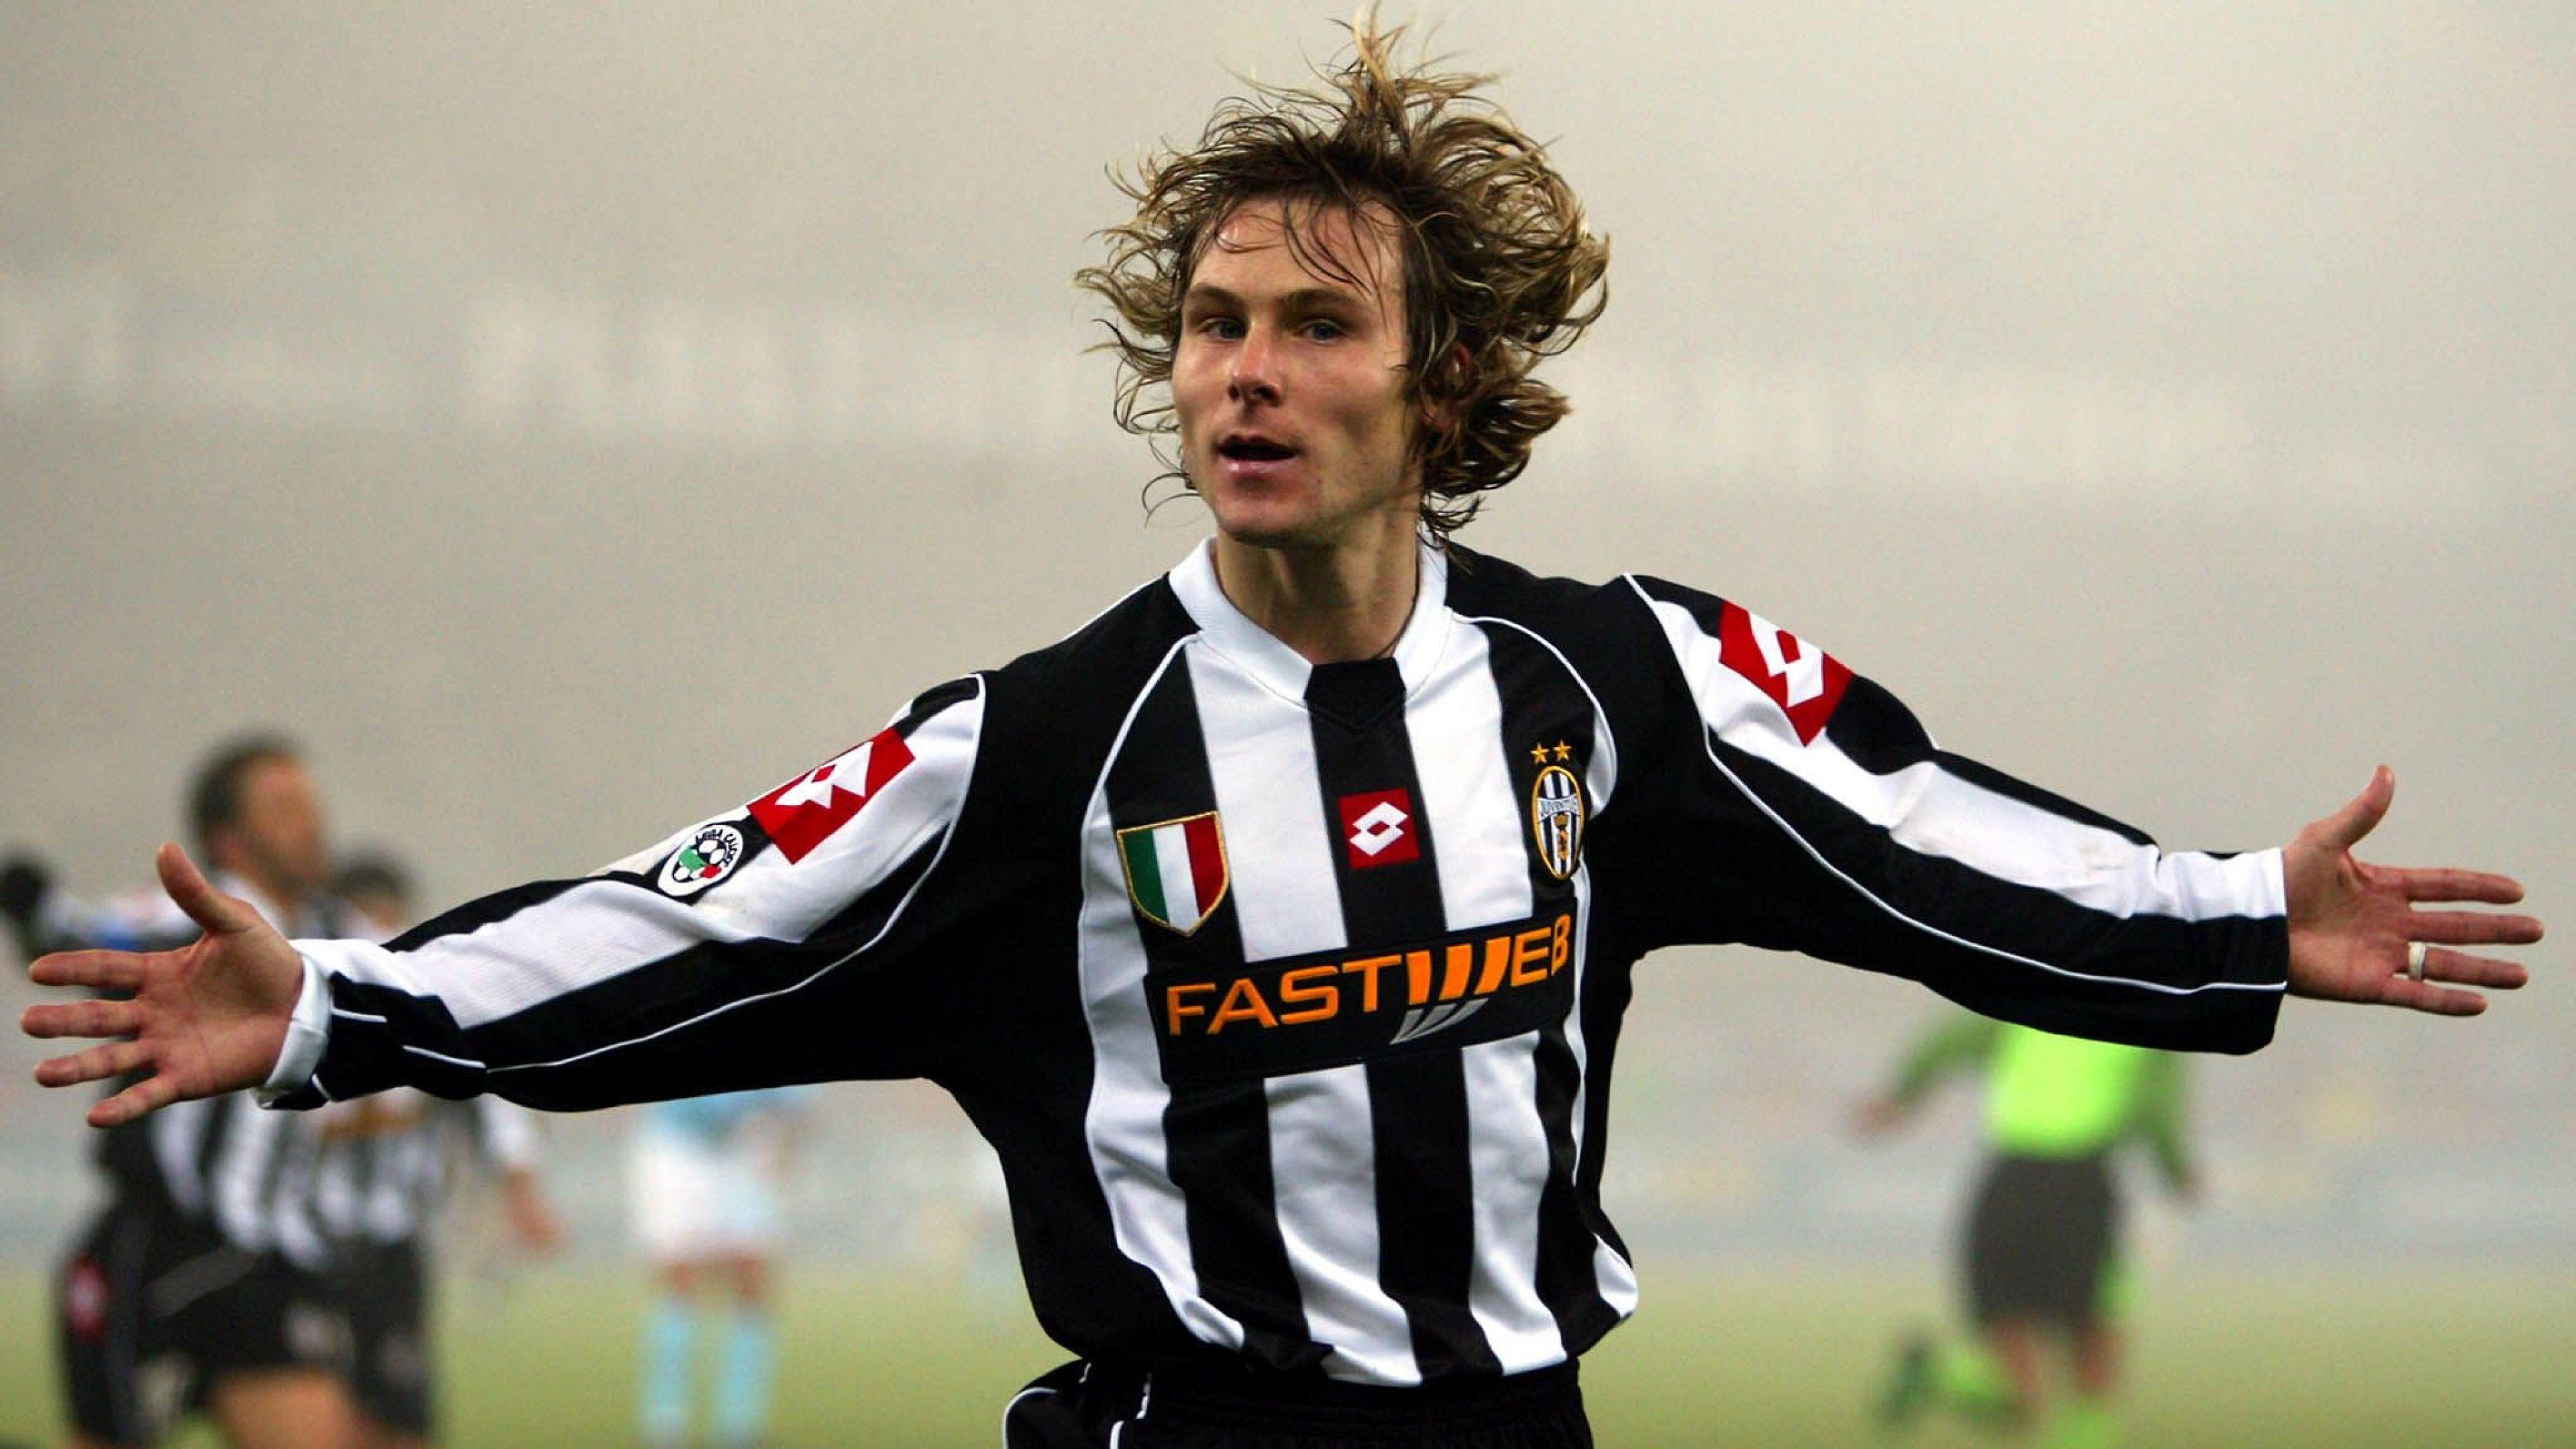 Download Wallpaper 3840x2160 Pavel nedved, Football, Champion